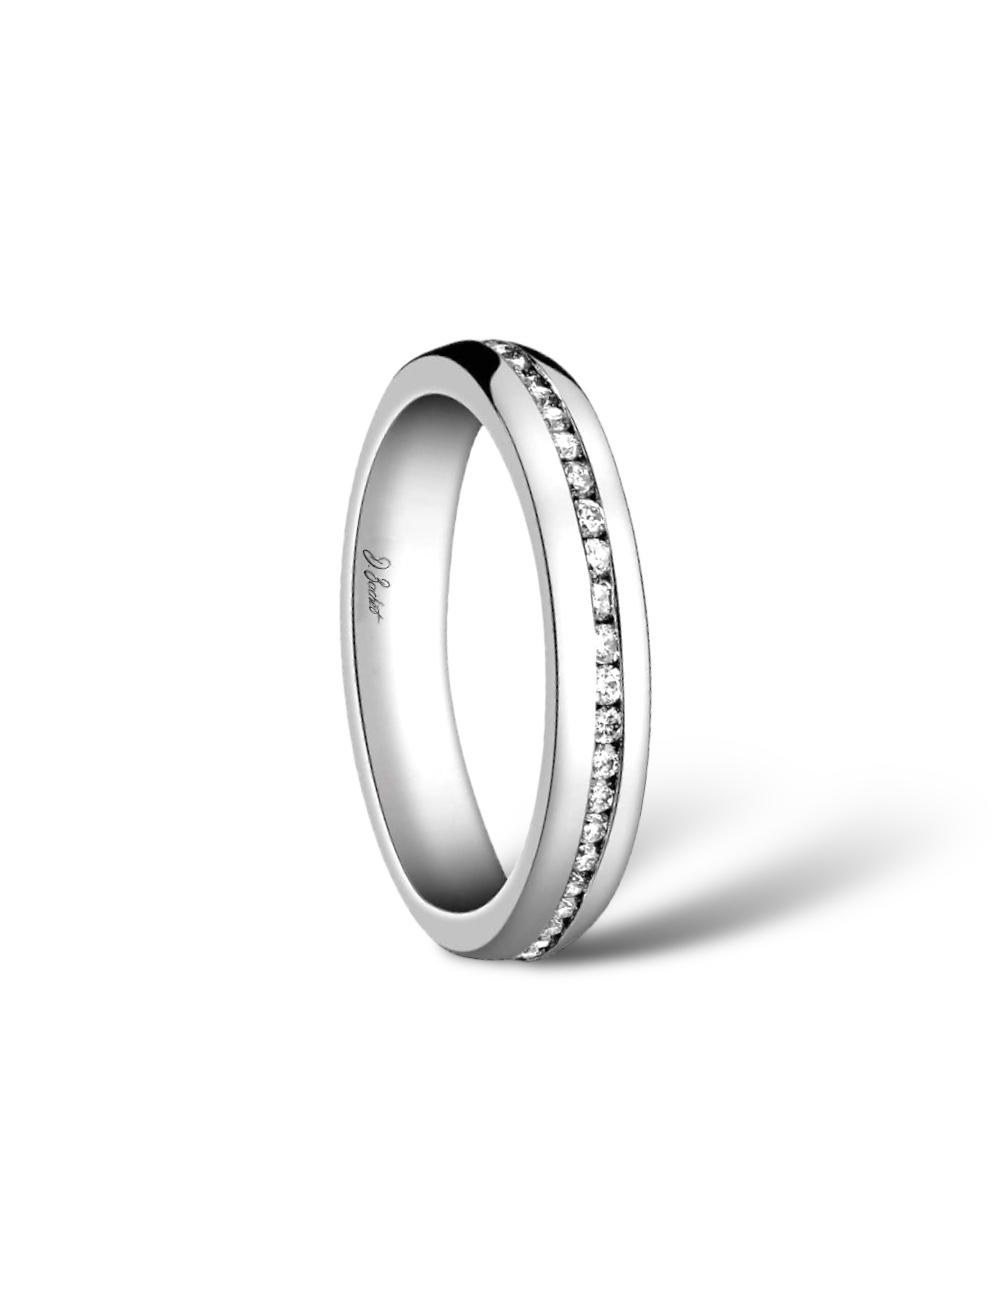 D.Bachet women's wedding band, chic and delicate with white diamonds set in platinum, showcasing timeless and modern elegance.